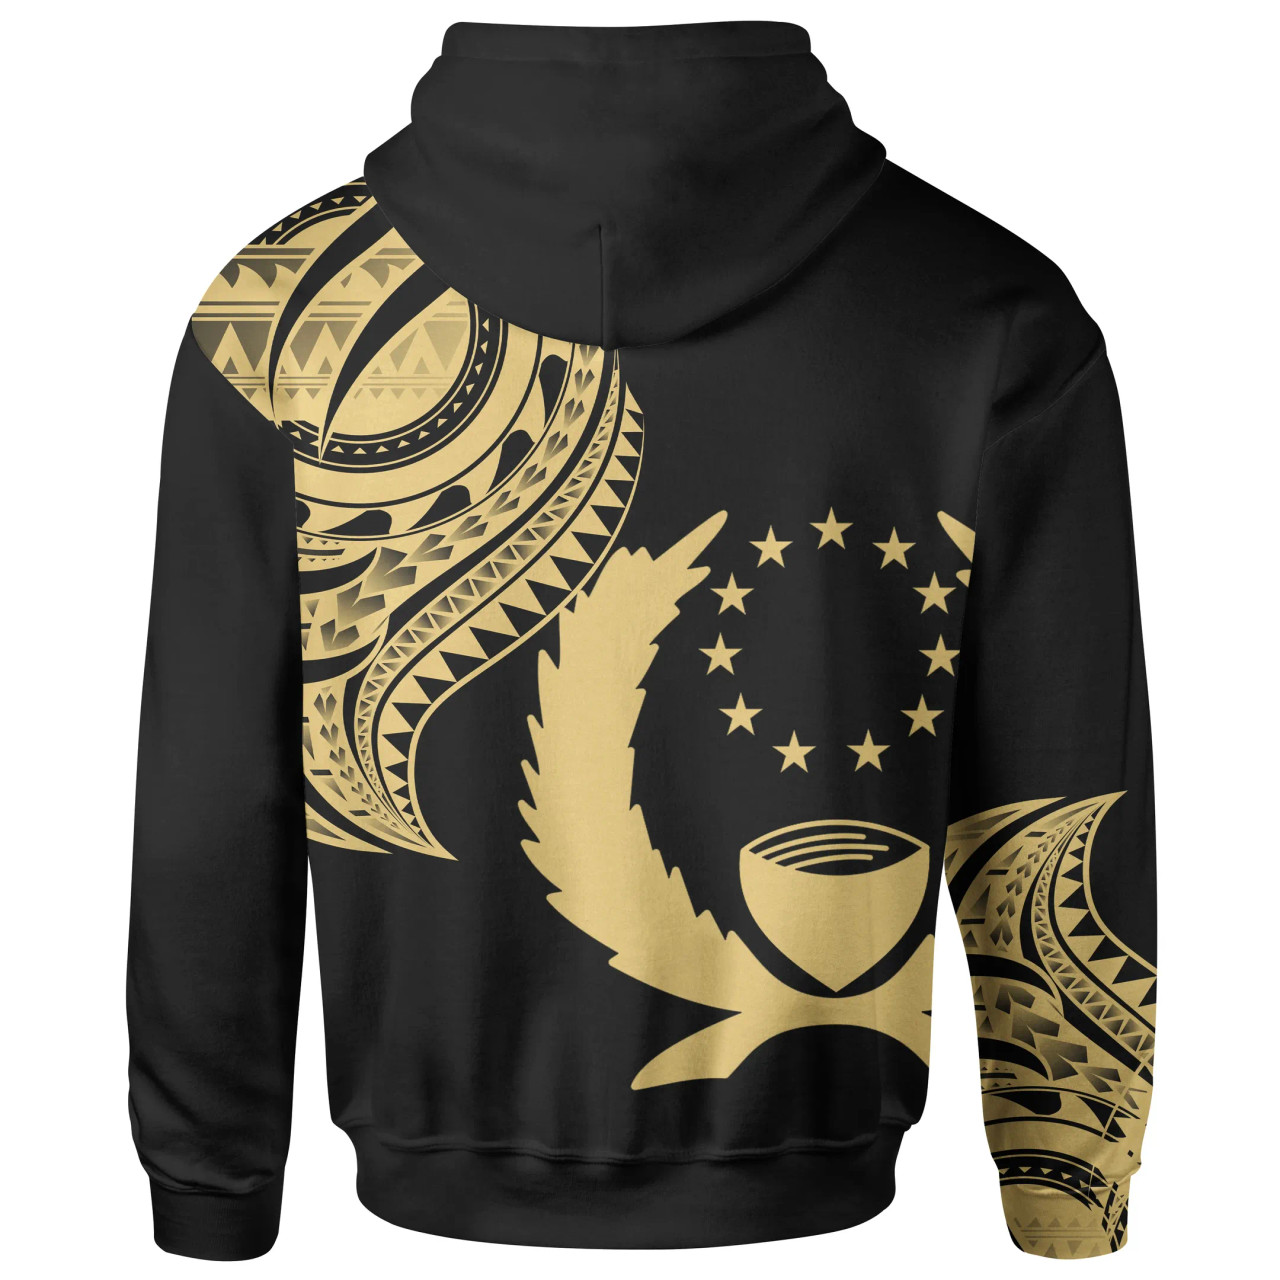 Pohnpei State Hoodie - Pohnpei State Tatau Gold Patterns With Coat Of Arms